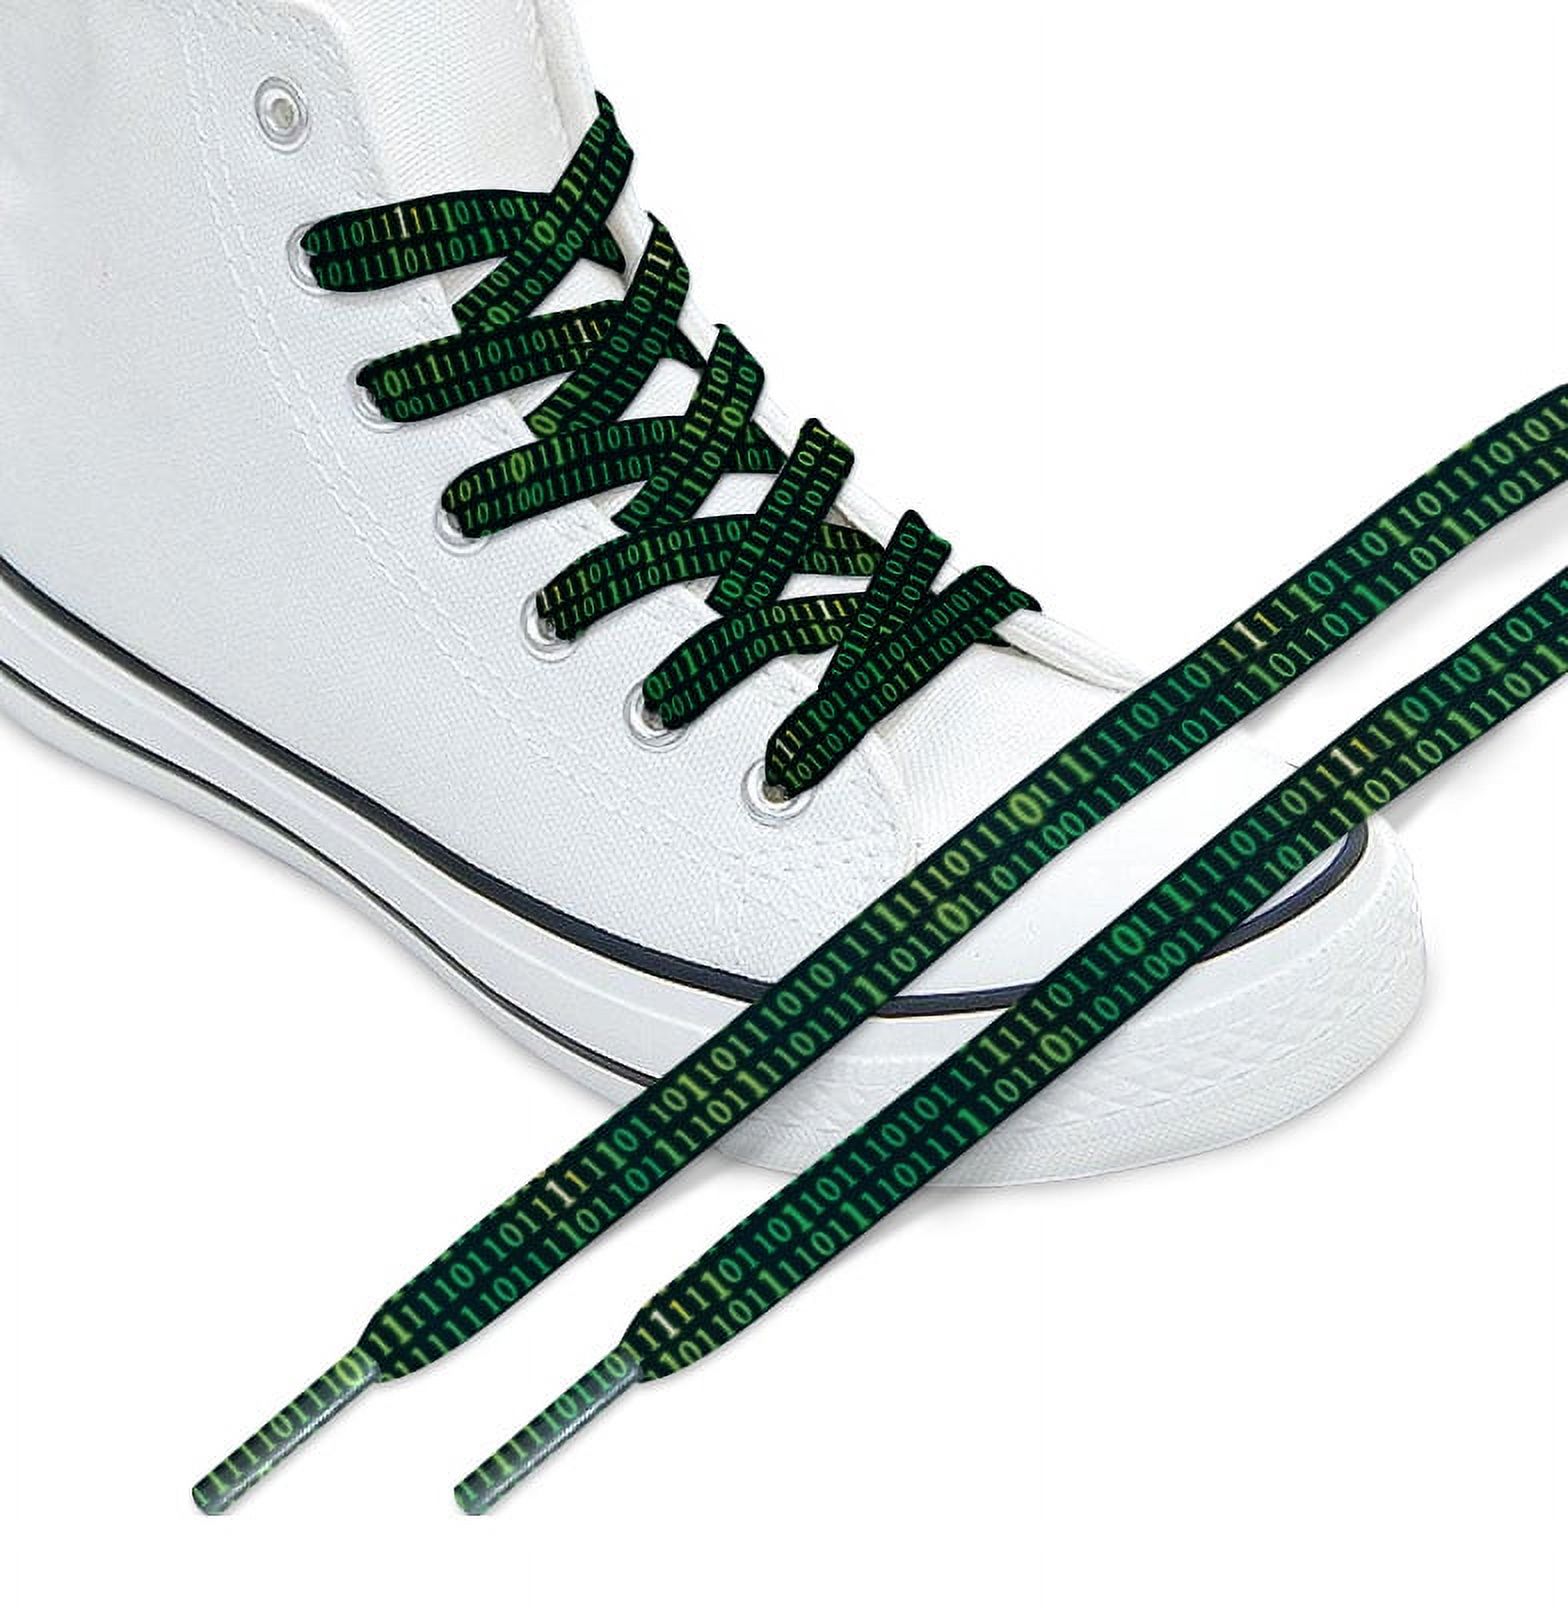 WIRESTER 1 Pair Replacement Shoelaces Fashion Shoestrings forHiking Shoes, Sport Shoes, Boots, Sneakers, Outdoor - Green Binary Code - image 1 of 7